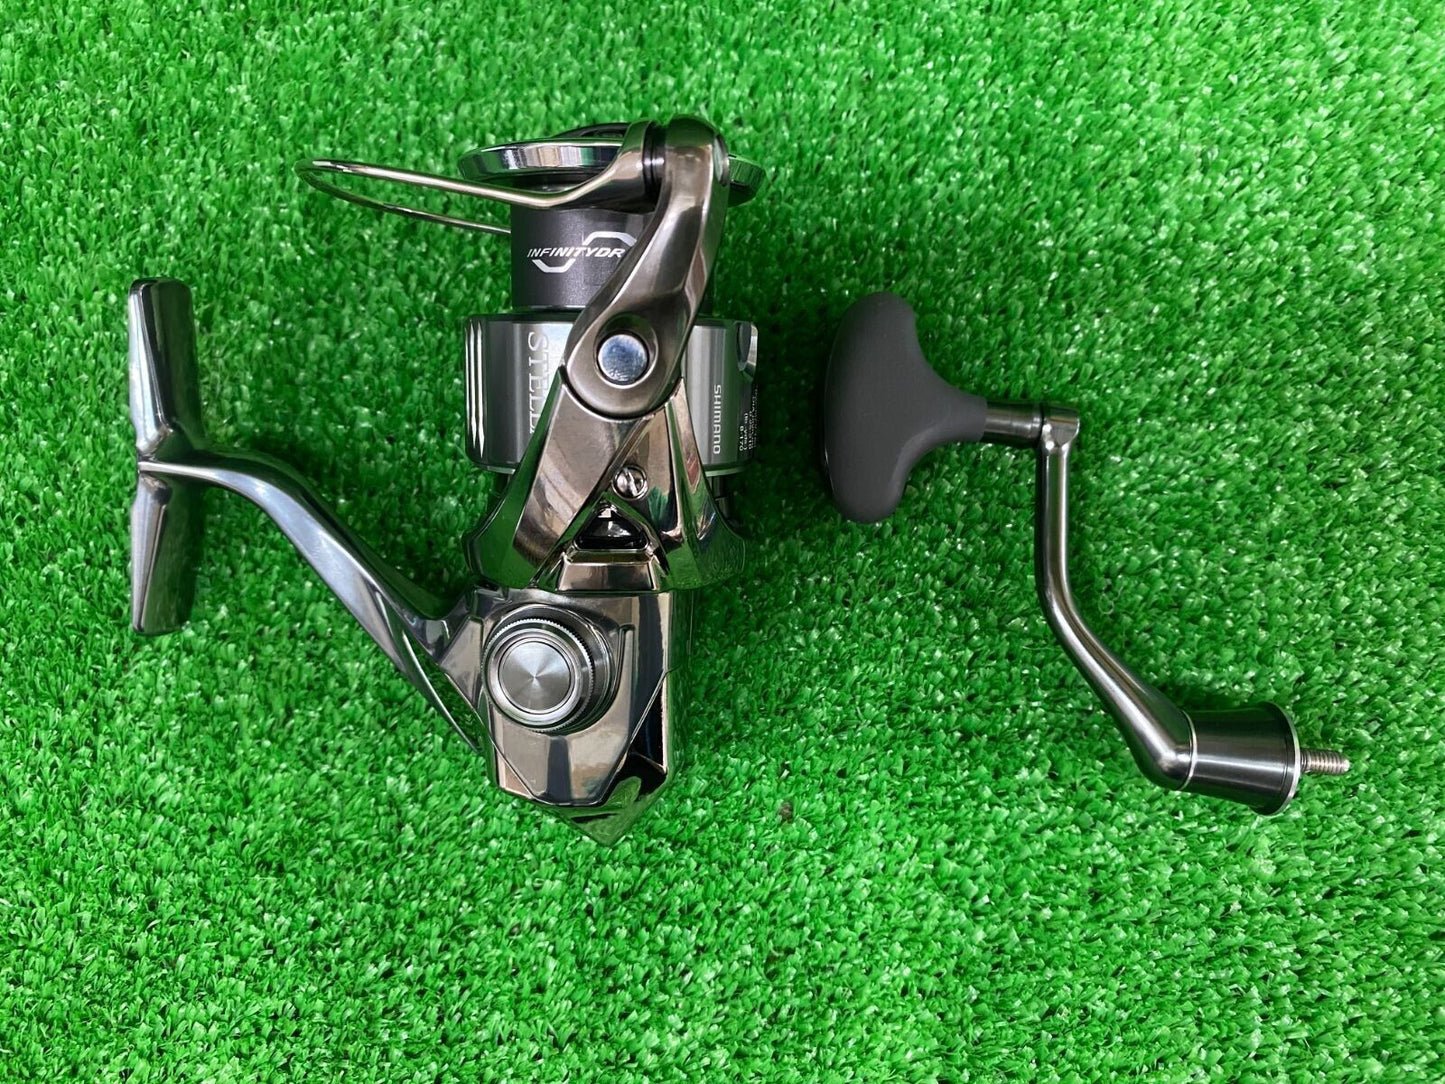 Shimano 22 STELLA C3000XG Spinning Reel Gear Ratio 6.4:1 from F/S from Japan